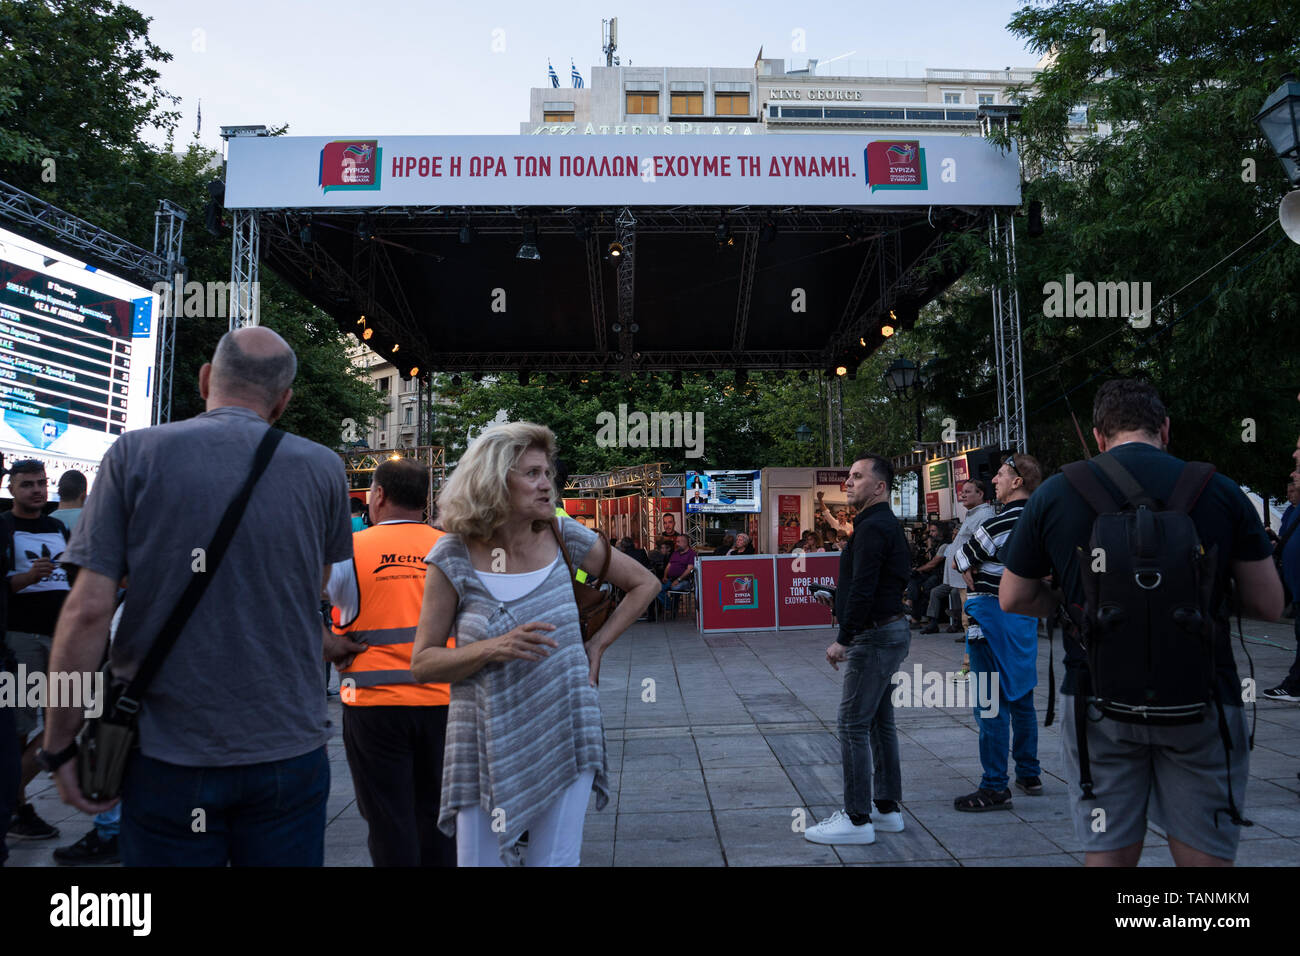 Supporters of the Greek political party 'SYRIZA' seen watching the exit polls of European Parliament election at Syriza's electoral kiosk in Athens. The European parliament elections took place between 23 and 26 May 2019 with the participation of all the countries members of the European Union and were the ninth parliamentary election since 1979. Stock Photo